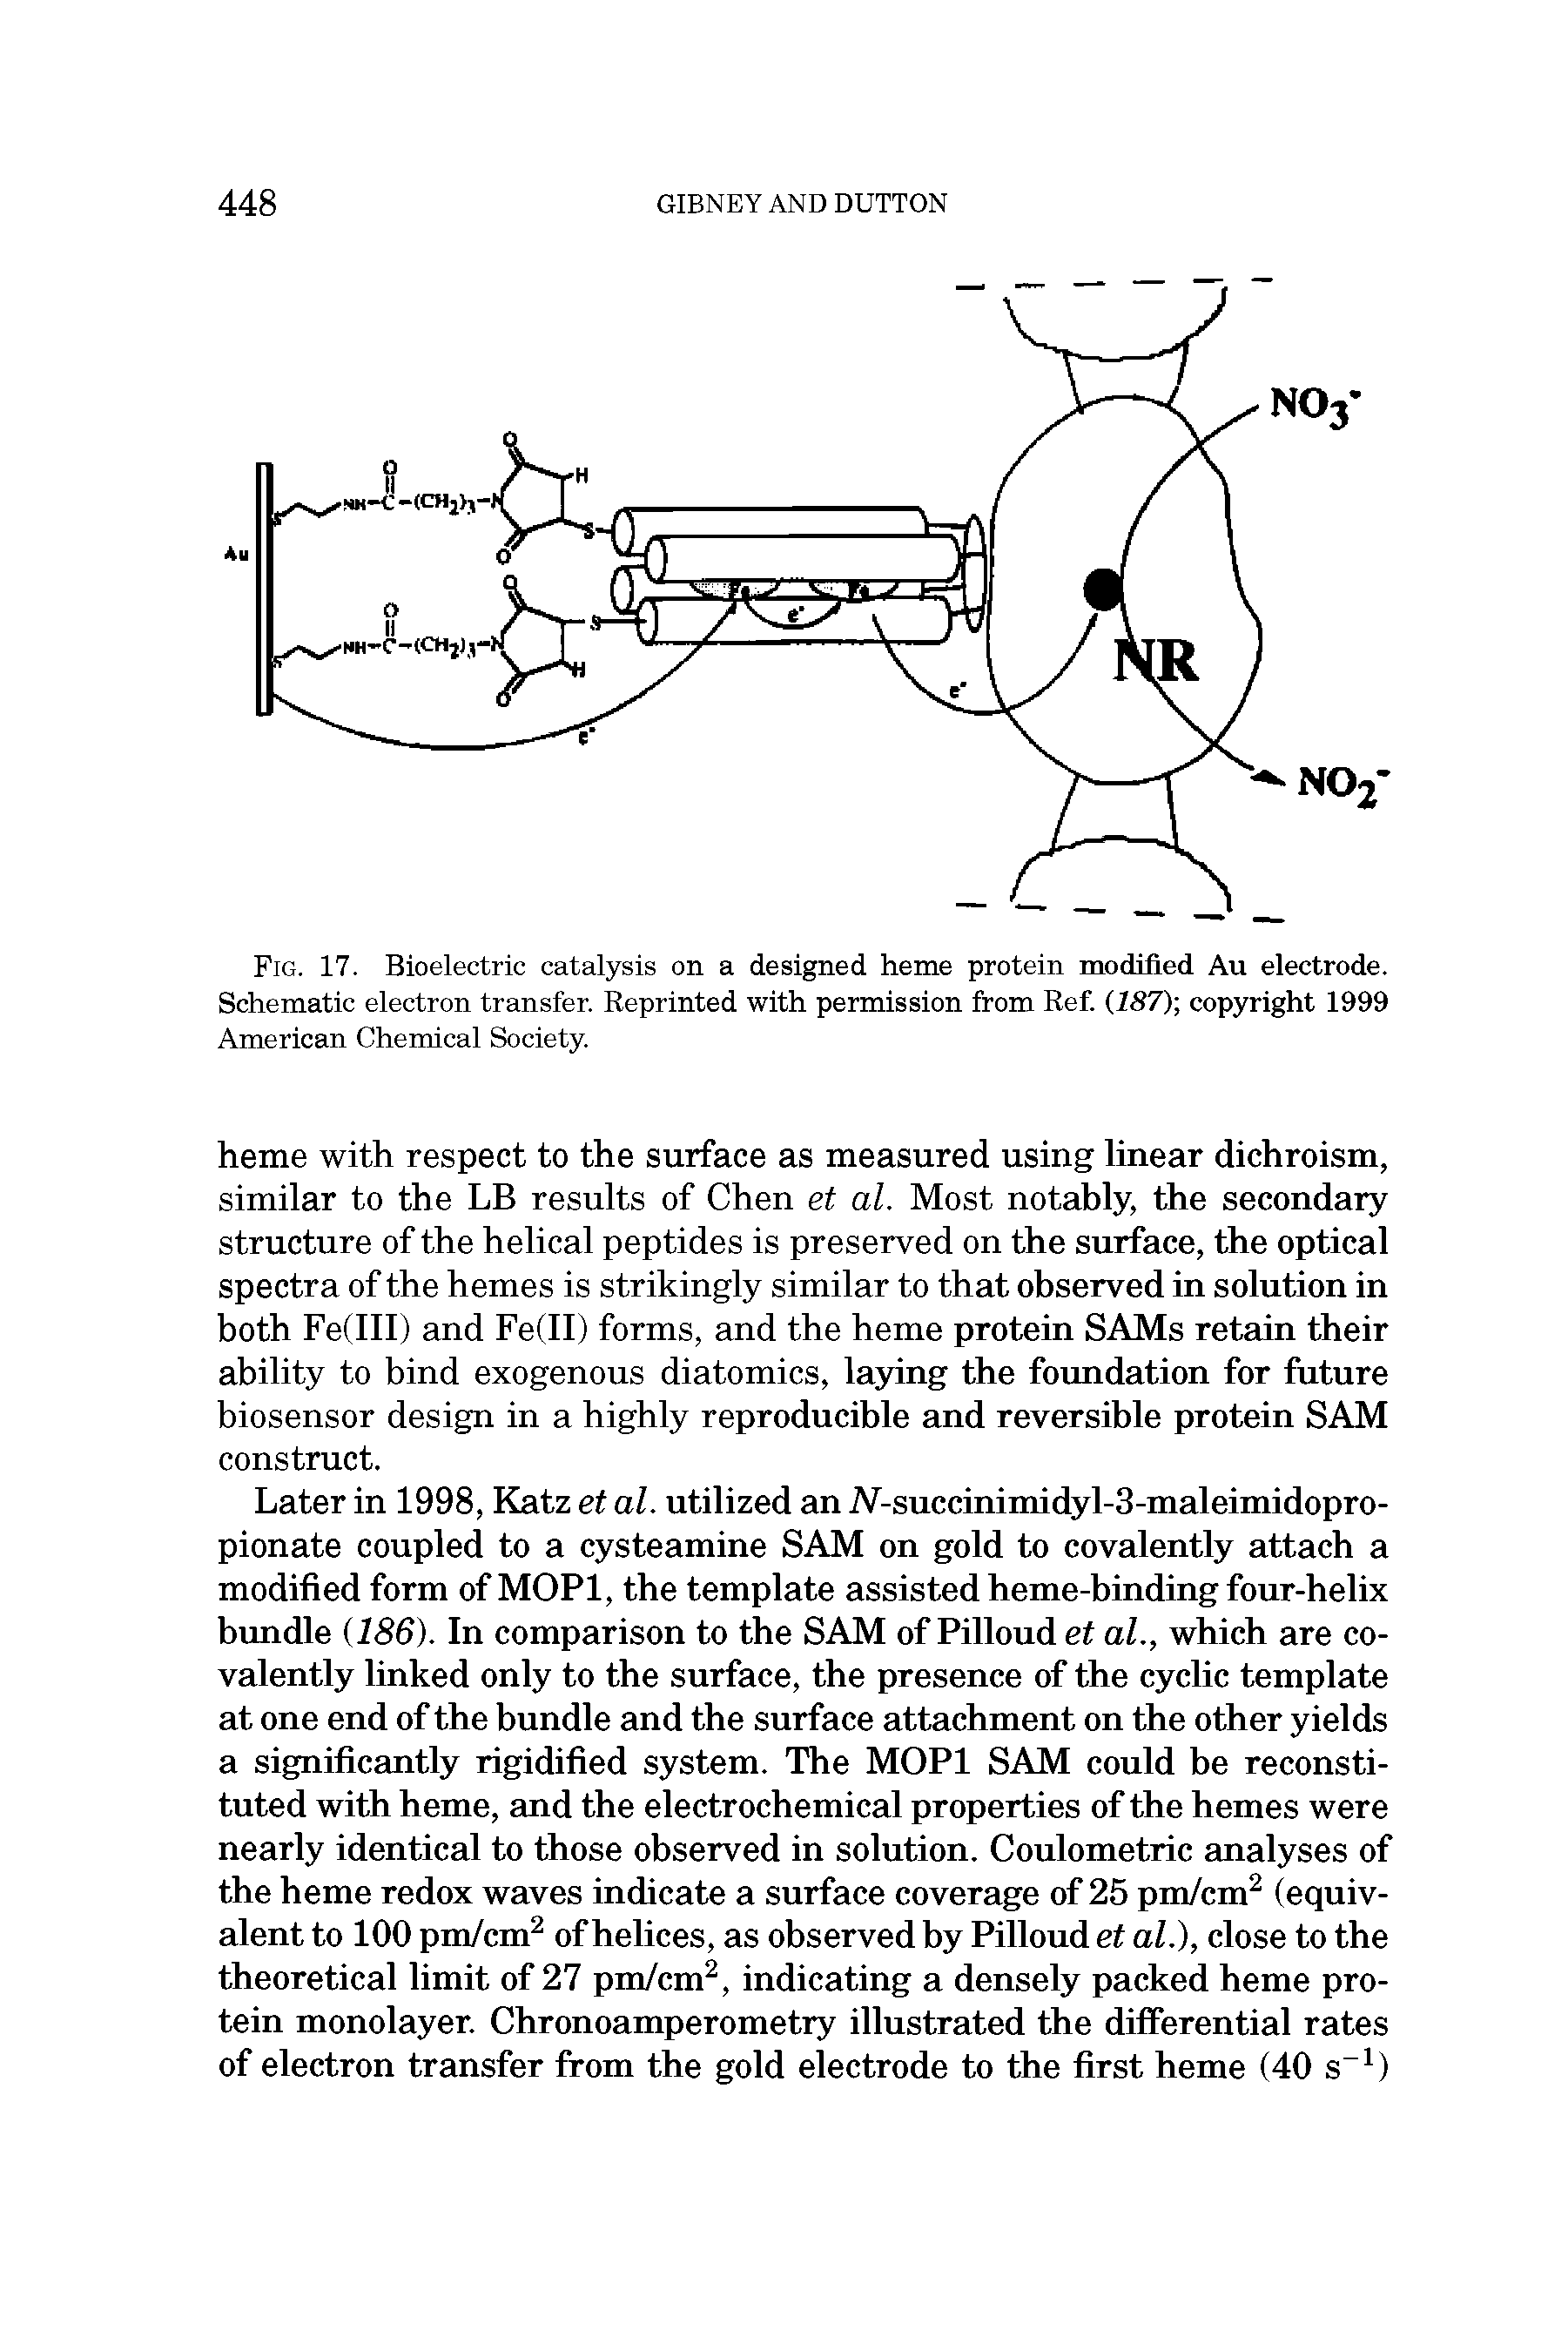 Fig. 17. Bioelectric catalysis on a designed heme protein modified Au electrode. Schematic electron transfer. Reprinted with permission from Ref. (7S7) copyright 1999 American Chemical Society.